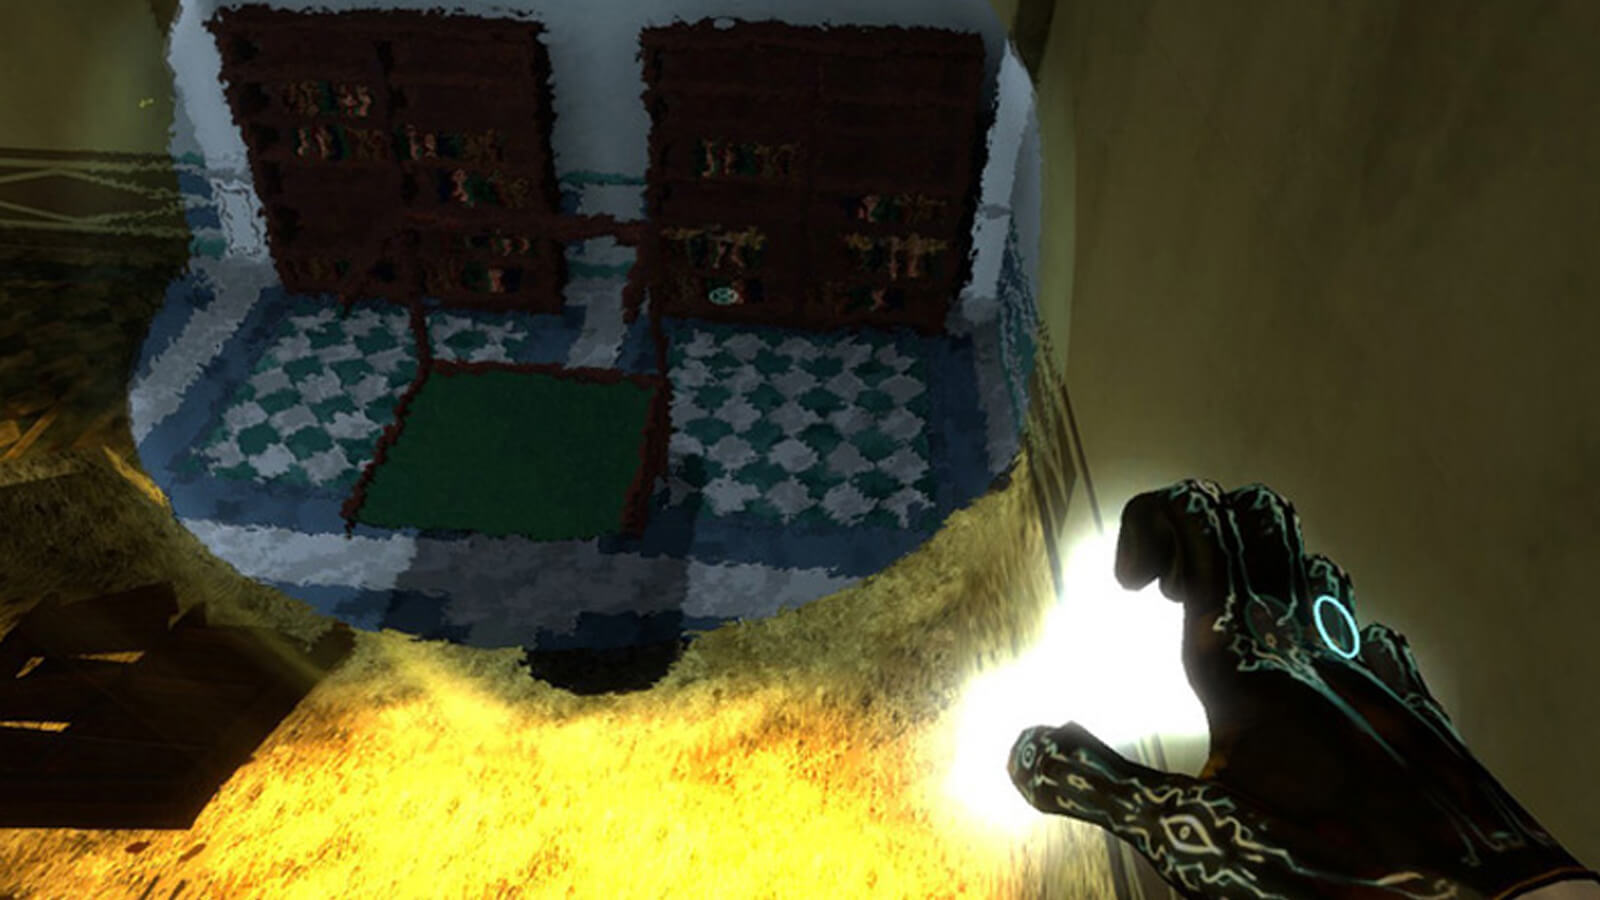 The player's hand is seen illuminated with runes as a shimmering image of shelving and a table appears